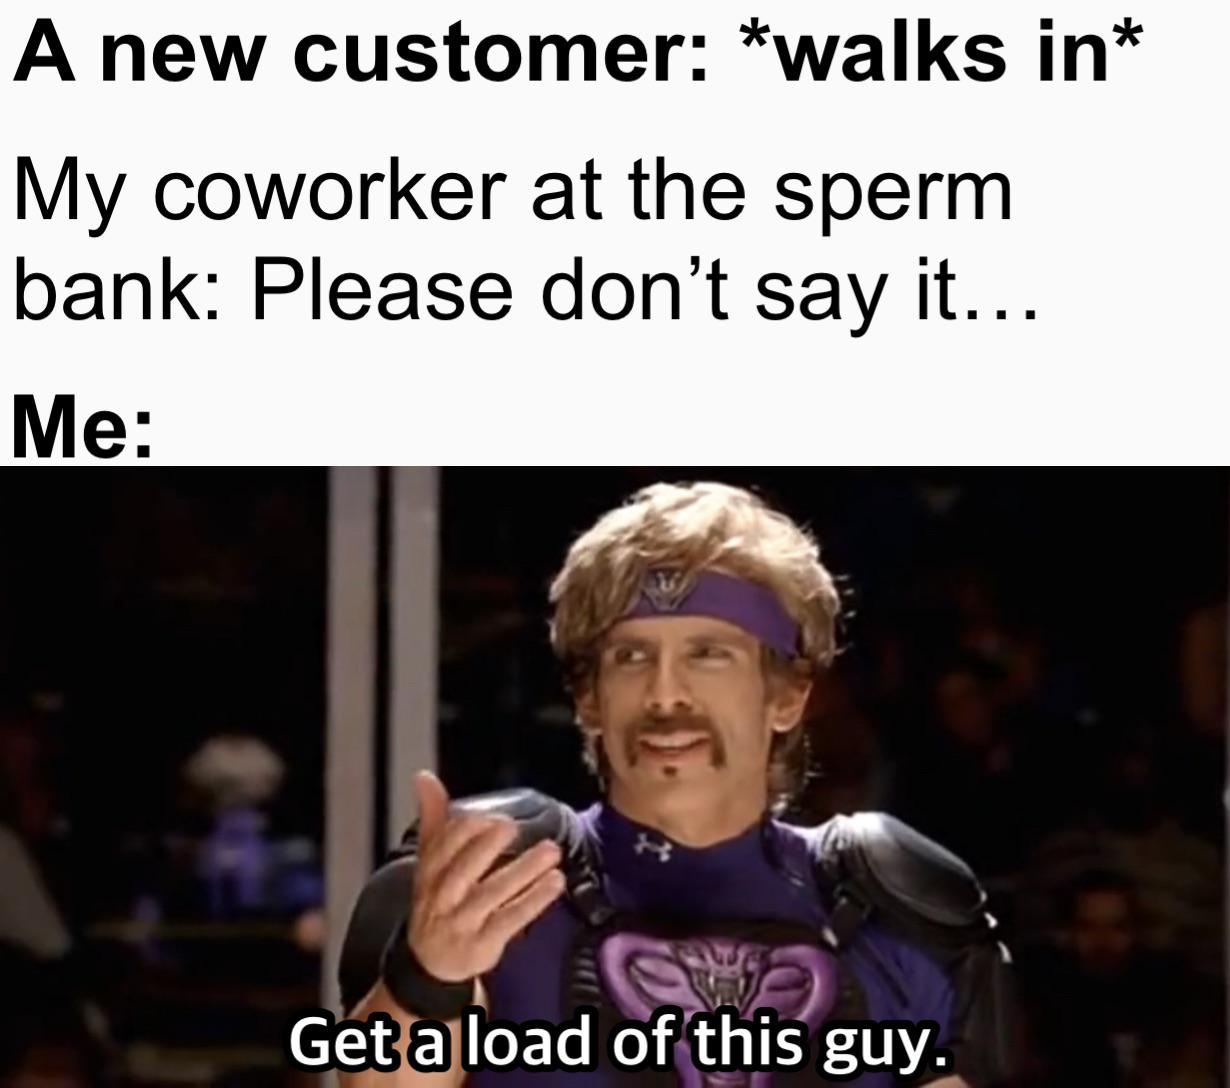 dank memes - funny classified - A new customer walks in My coworker at the sperm bank Please don't say it... Me Get a load of this guy.